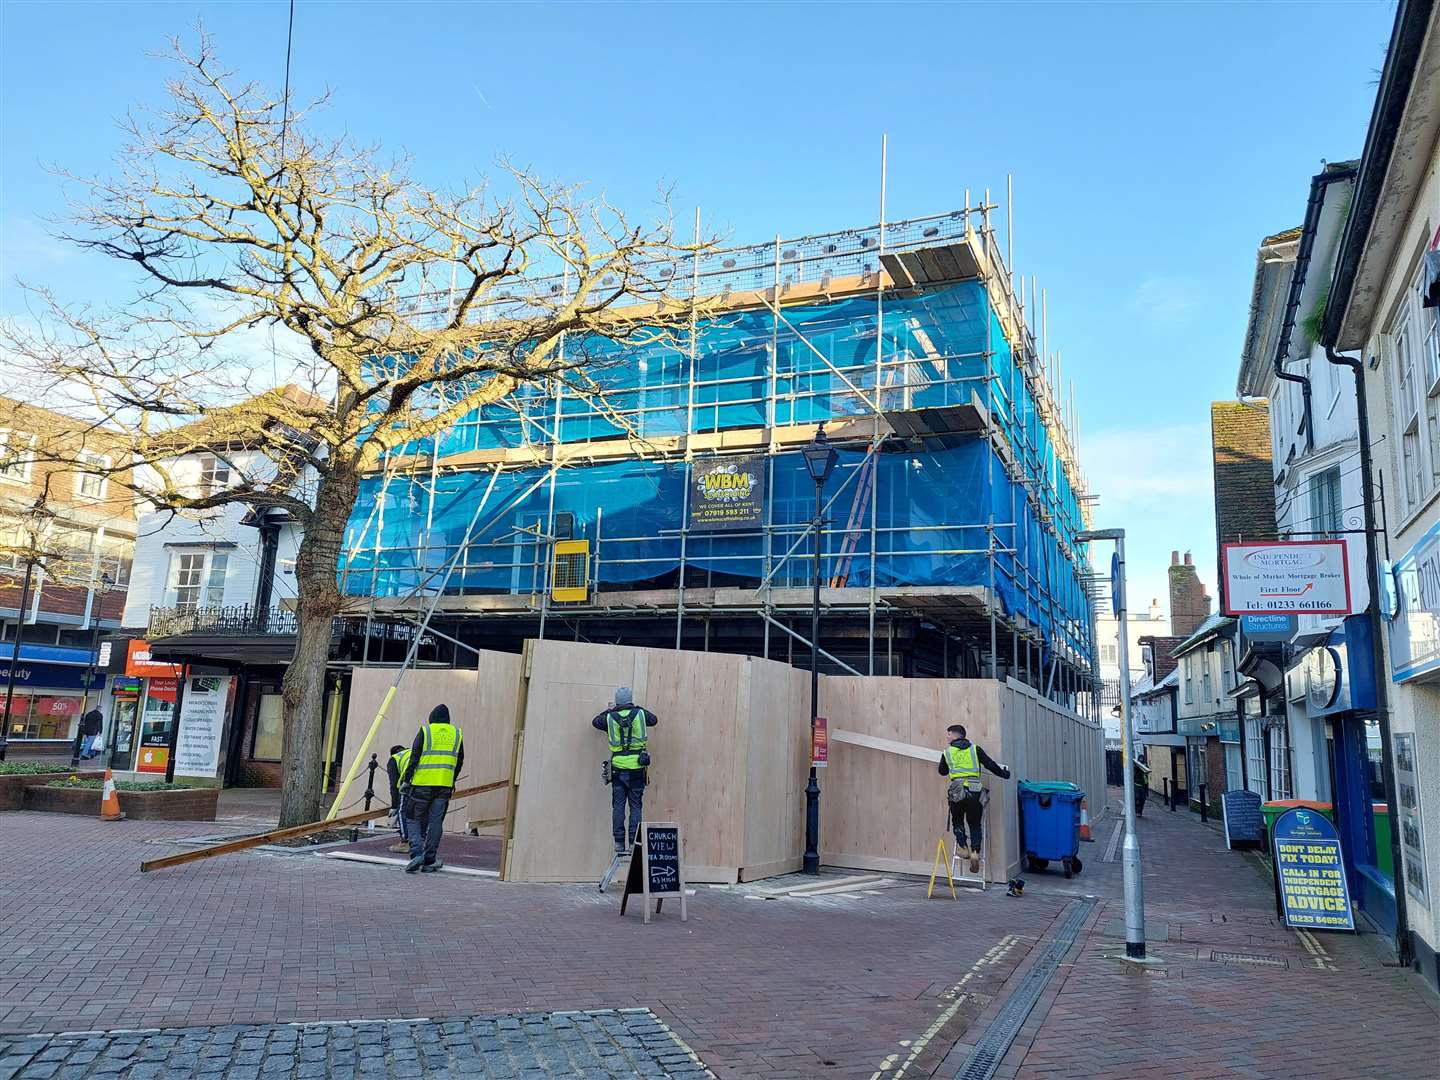 Work is being carried out on the John Wallis pub in Ashford